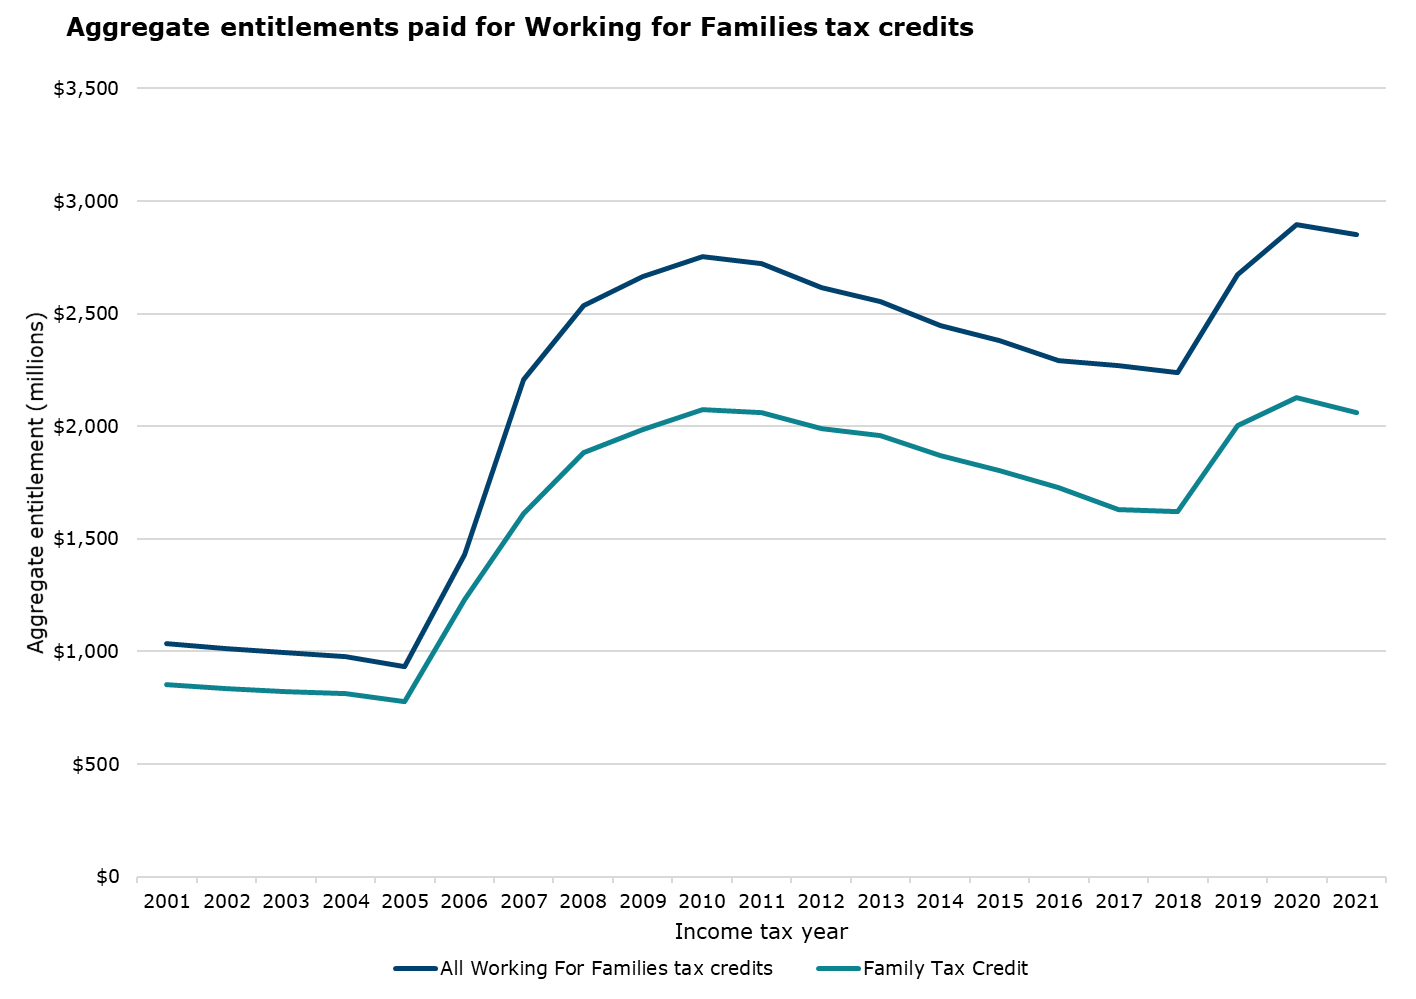 The aggregate entitlement starting at $1.03 billion in the 2001 tax year to $2.86 billion in the 2021 tax year following changes in the Family tax credit amounts and the types of tax credits available over the period. Graph shows this climb twice, once in 2005 and once in 2019. This growth is almost matched by Family tax credits alone.